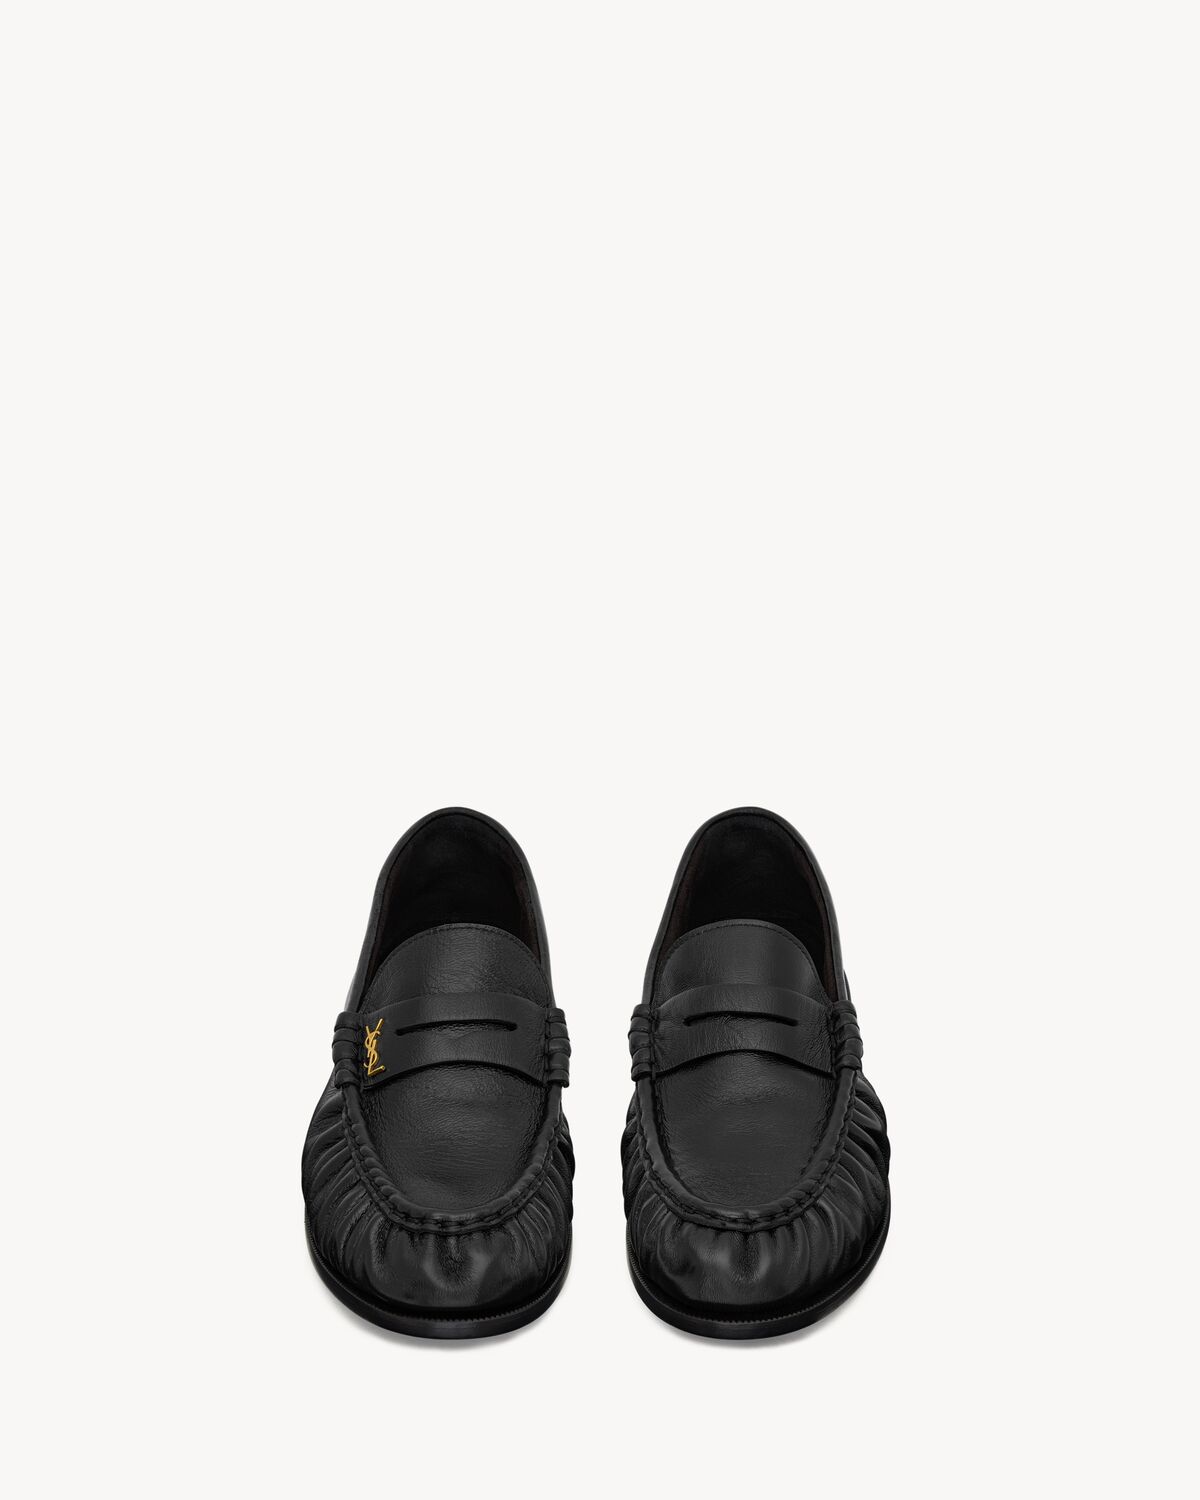 LE LOAFER penny slippers in shiny creased leather